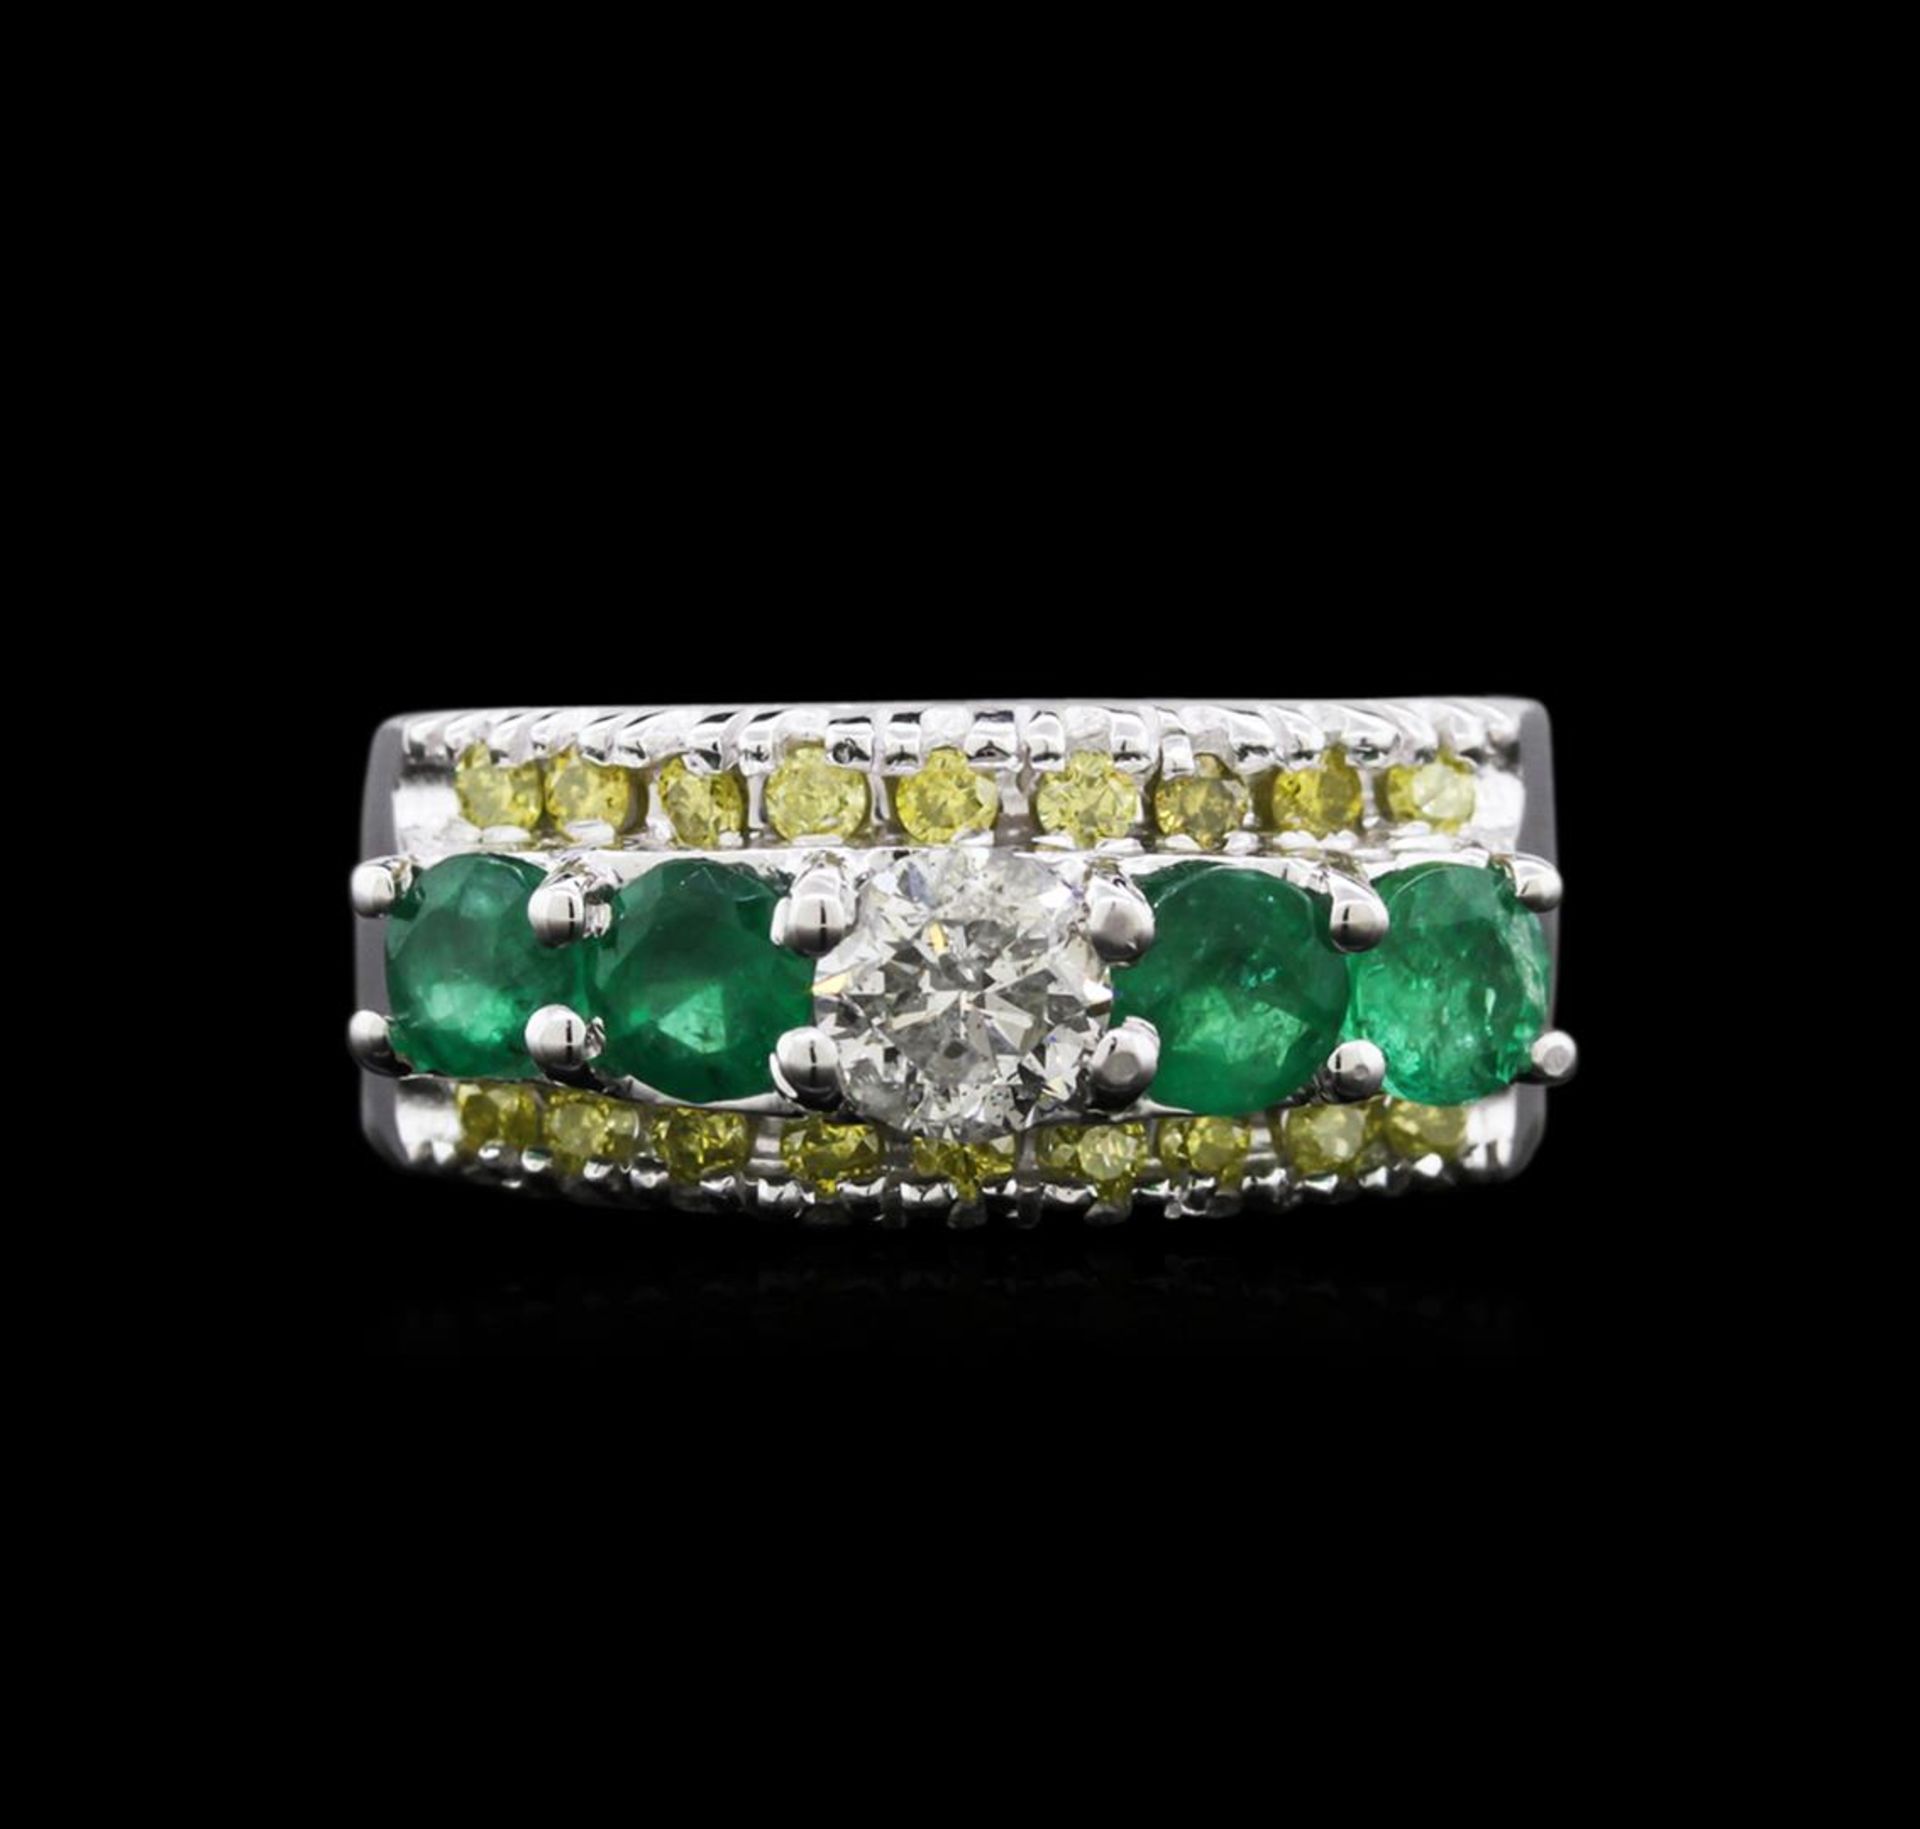 14KT White Gold 0.98 ctw Emerald and Diamond Ring - Image 2 of 4